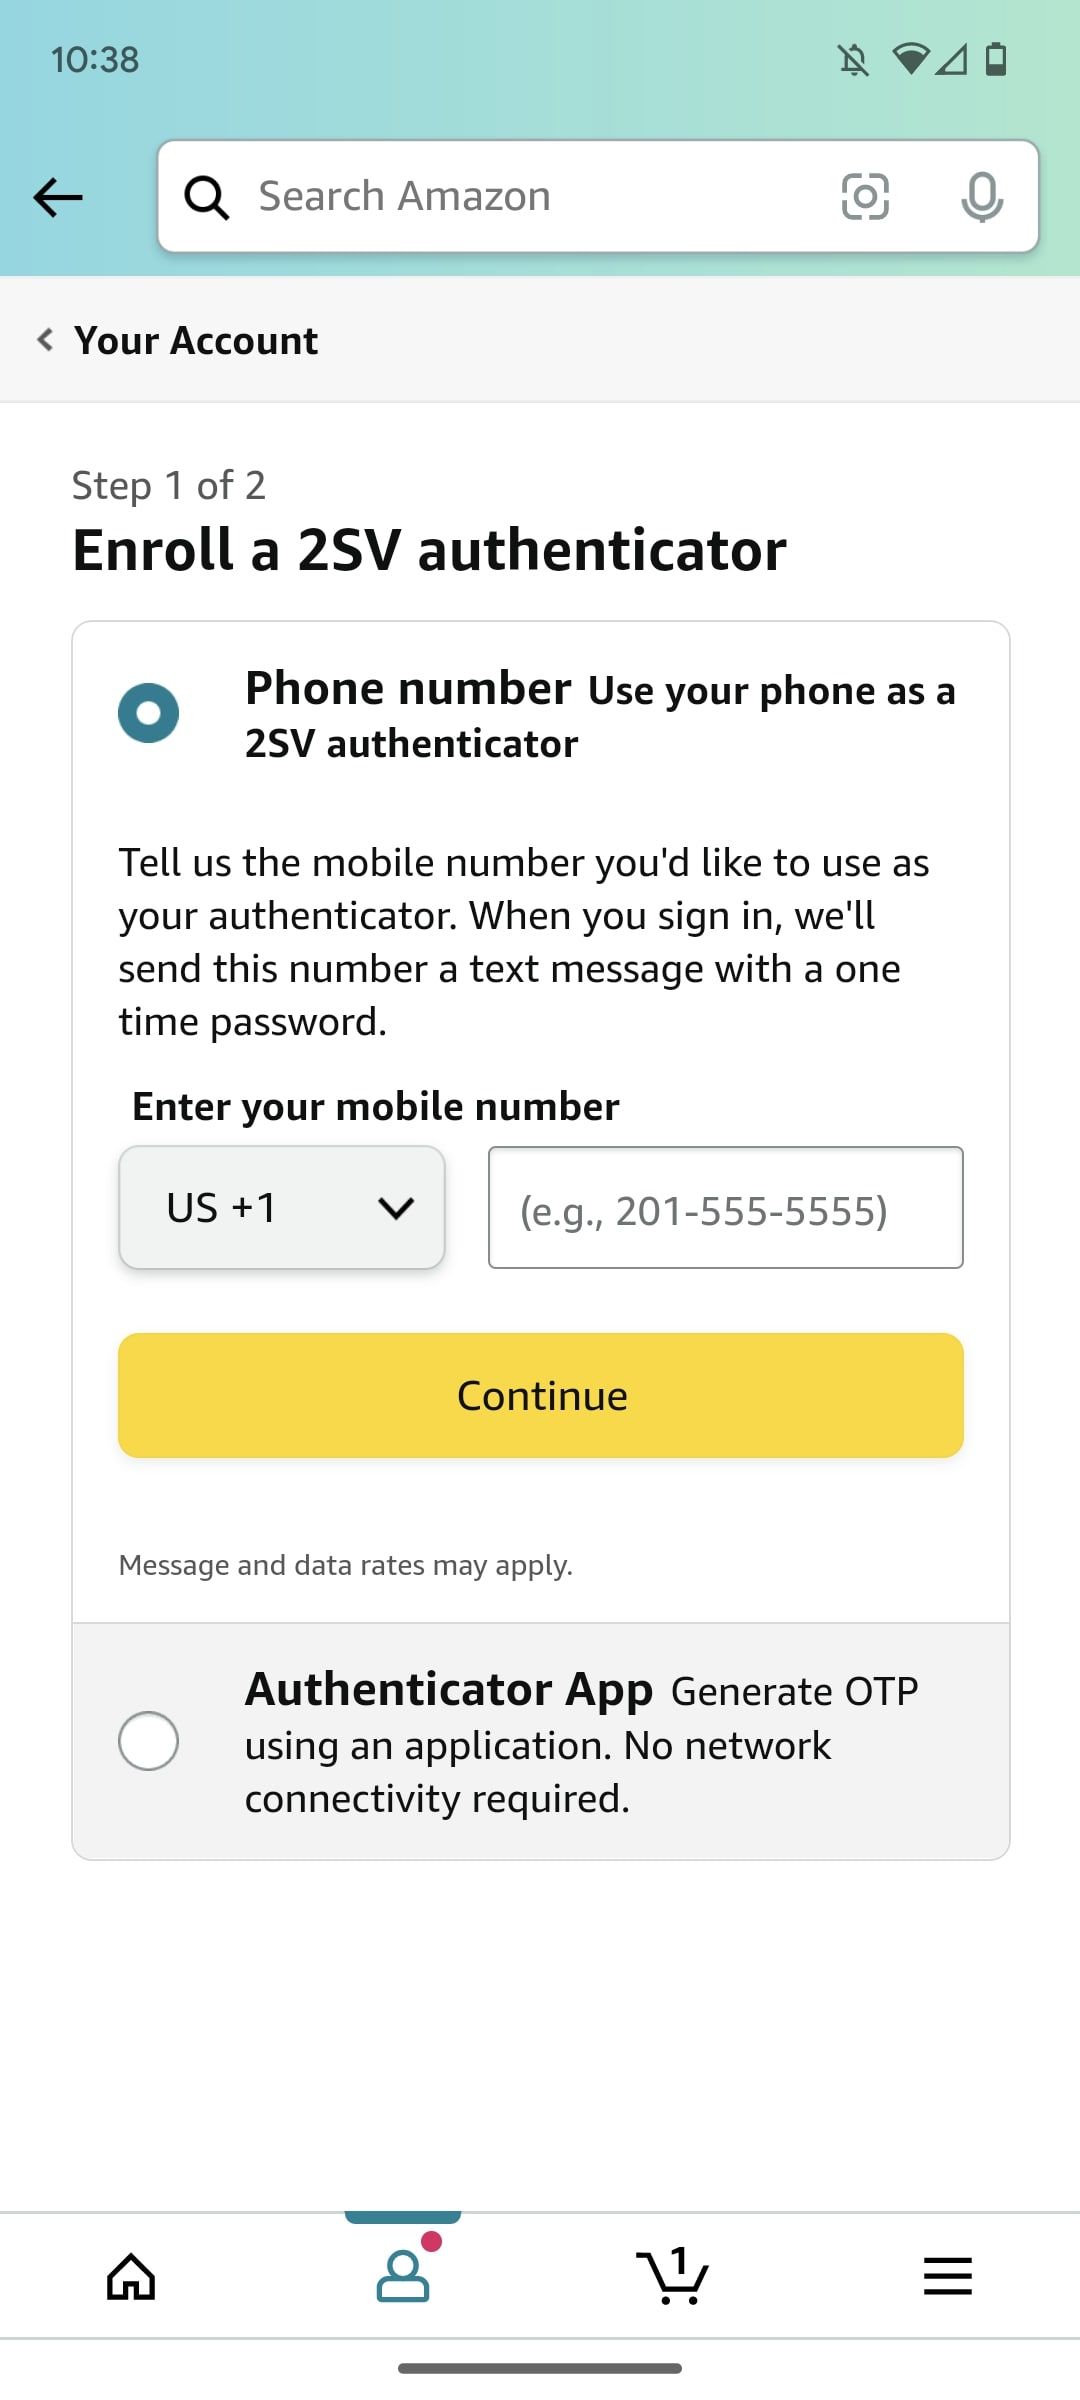 Adding a 2sv authentication app in the Amazon shopping app 